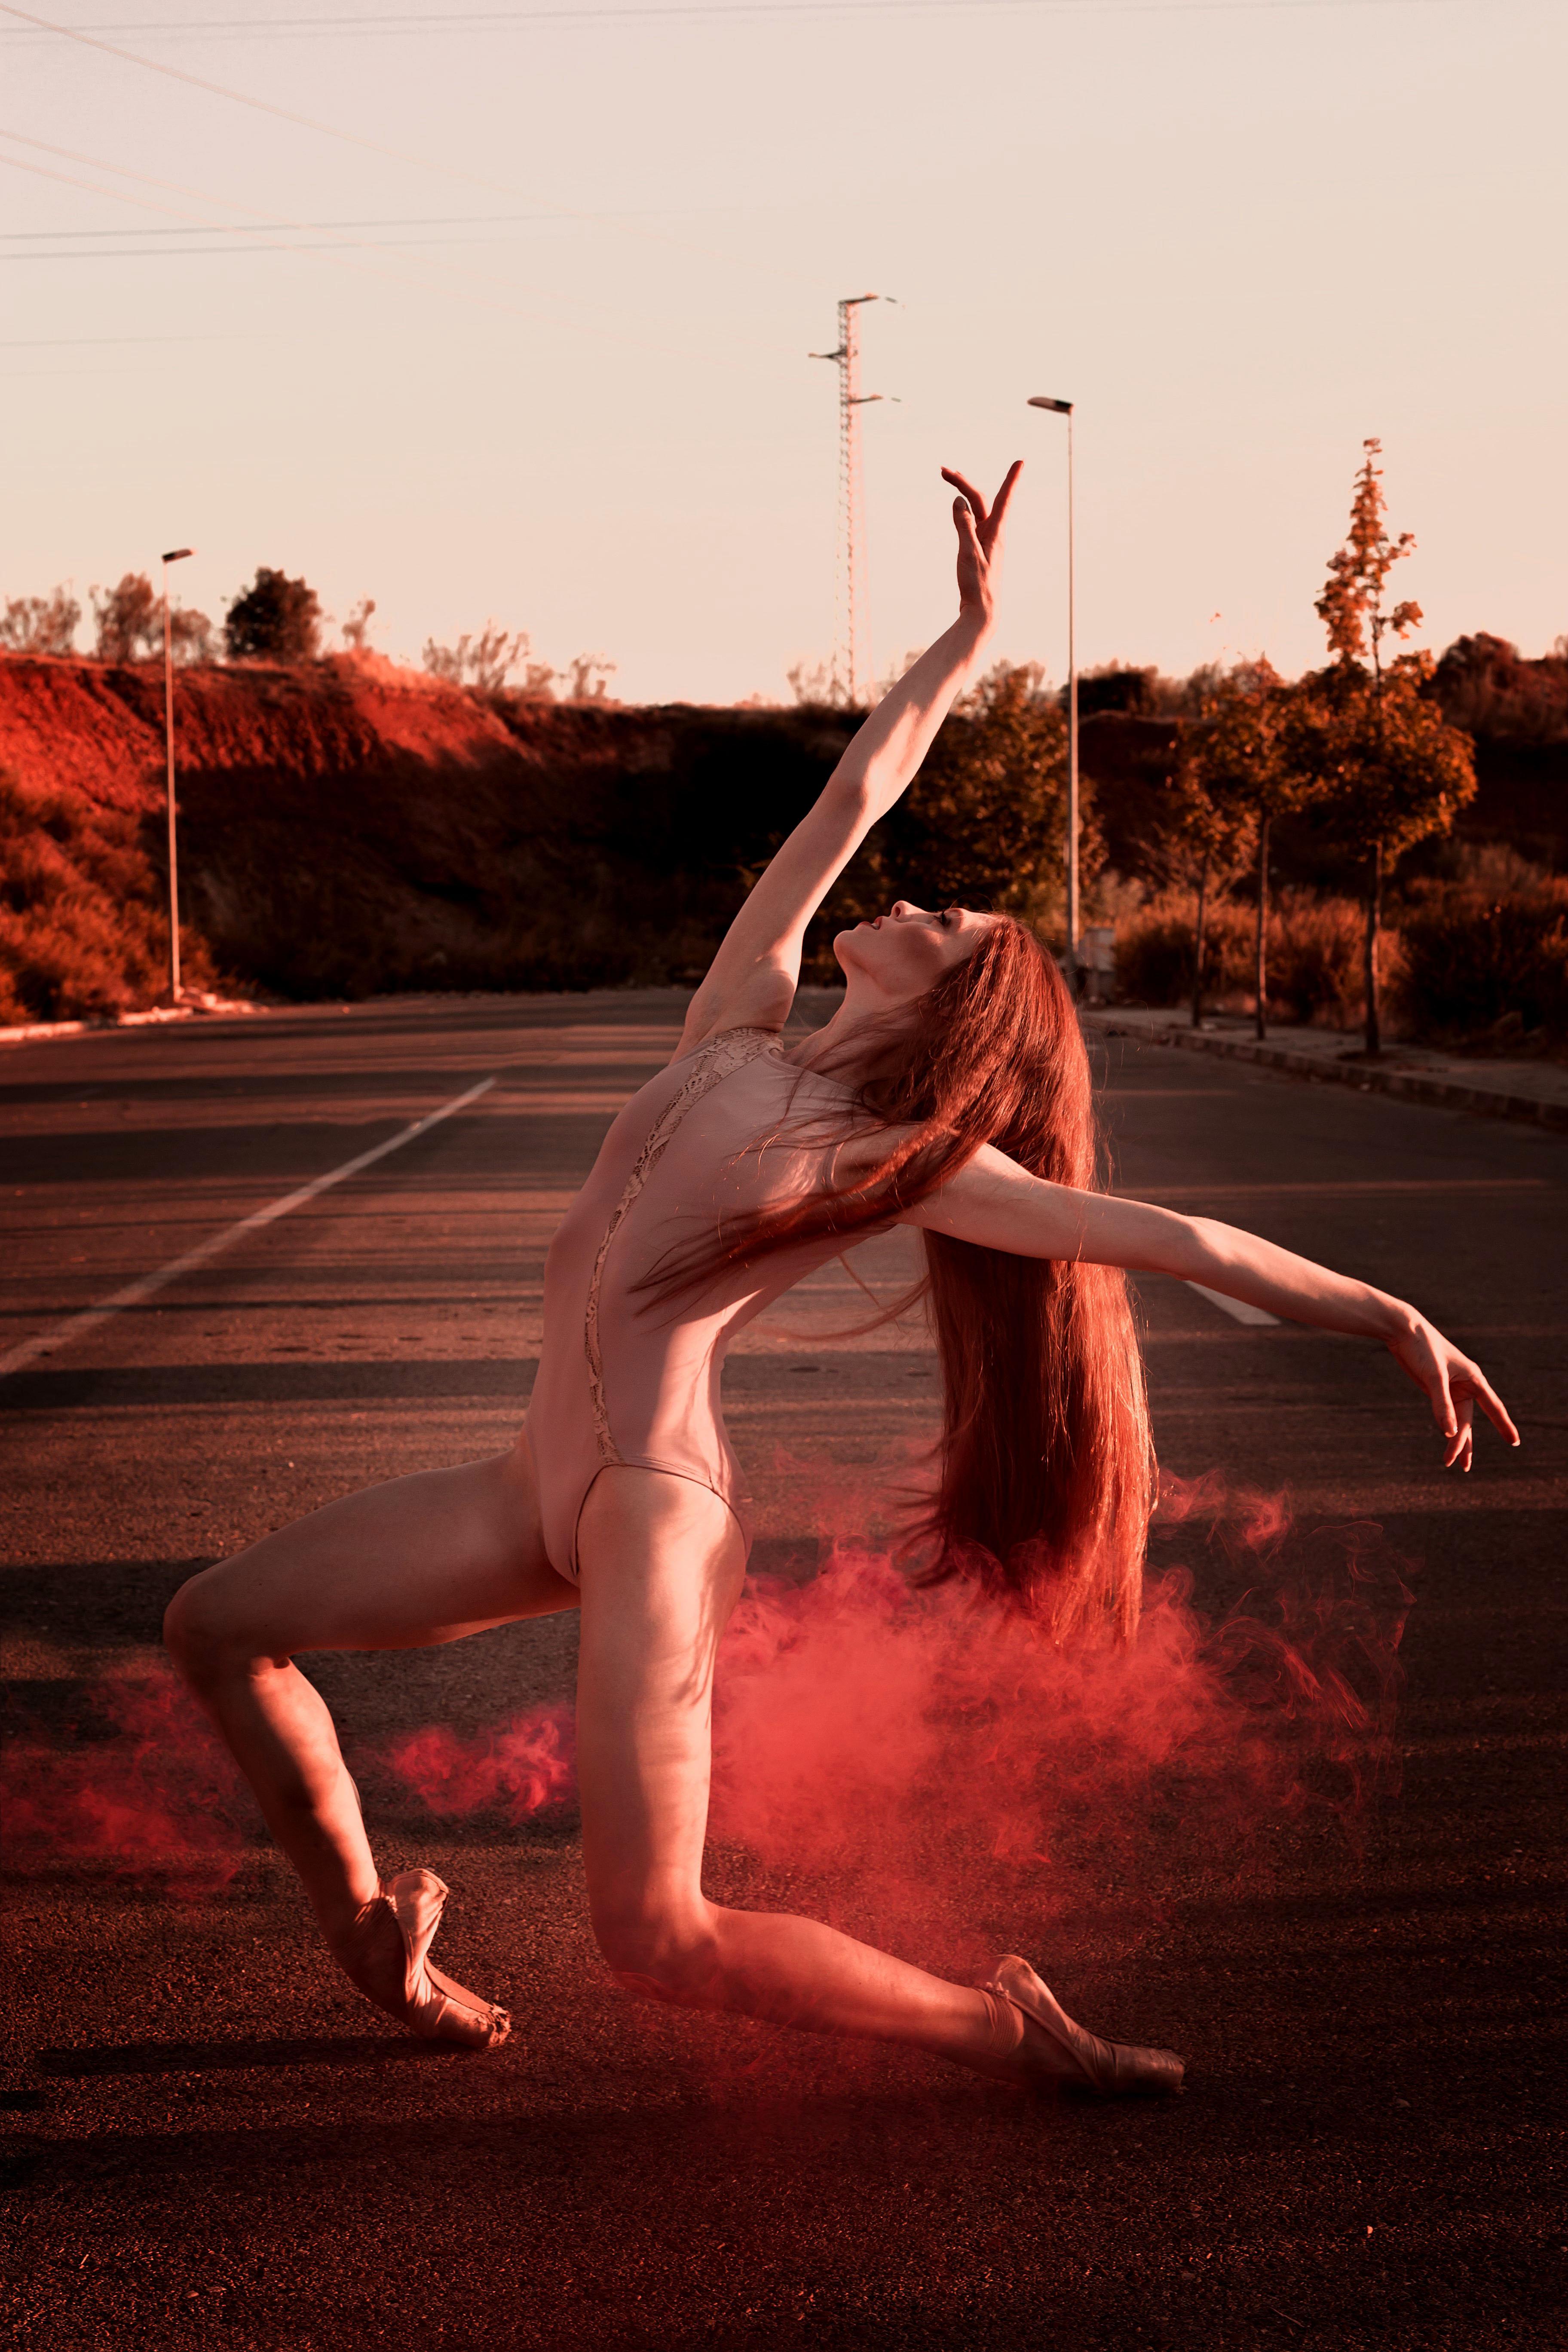 Pamela Pi is a young Spanish artists that seeks to materialize feelings through the images she creates. Due to her previous career as a ballet dancer, Pamela has a strong connection with her muses and models. The artists sees in the art of movement